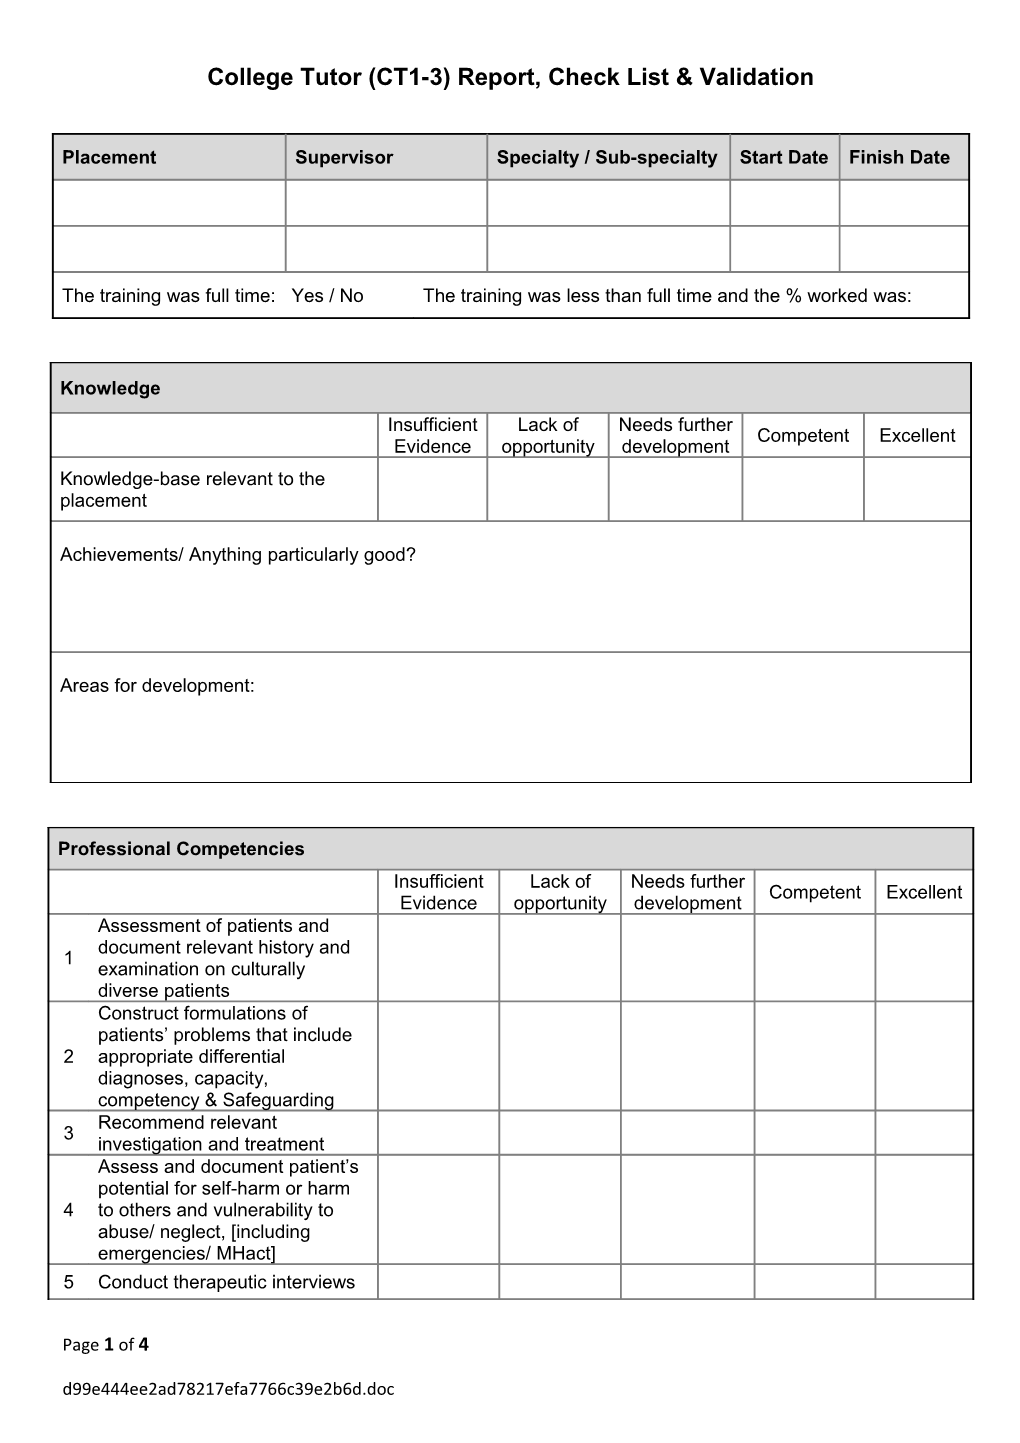 Educational Supervisor S Report: Placement 2